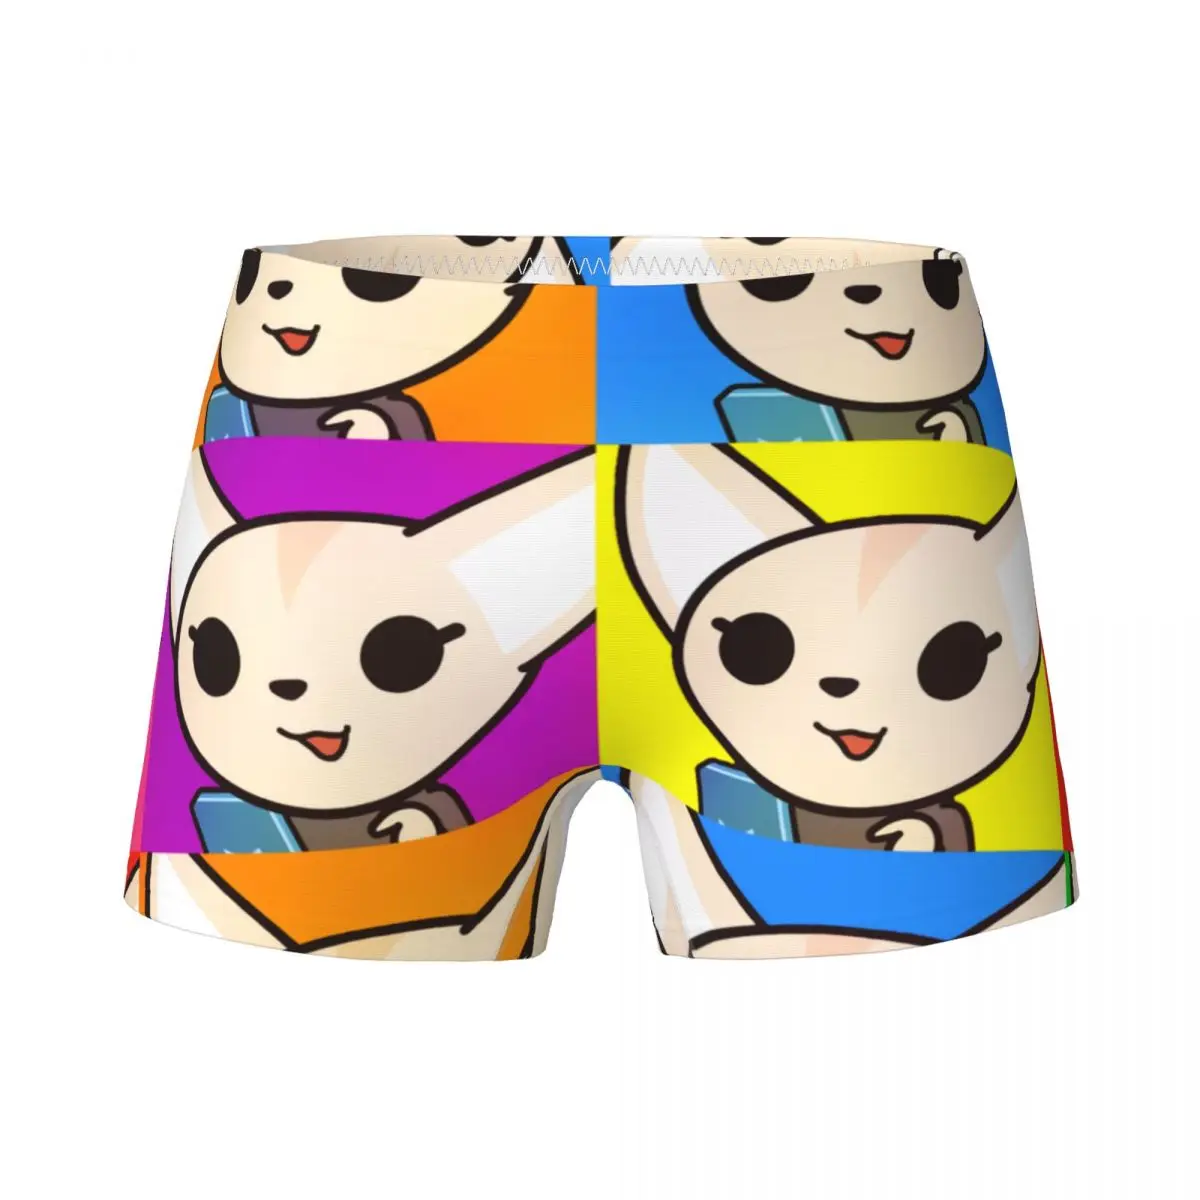 

Youth Girls Aggretsuko Animated Boxer Child Cotton Pretty Underwear Teenagers Kawaii Panda Game Underpants Soft Shorts For 4-15Y